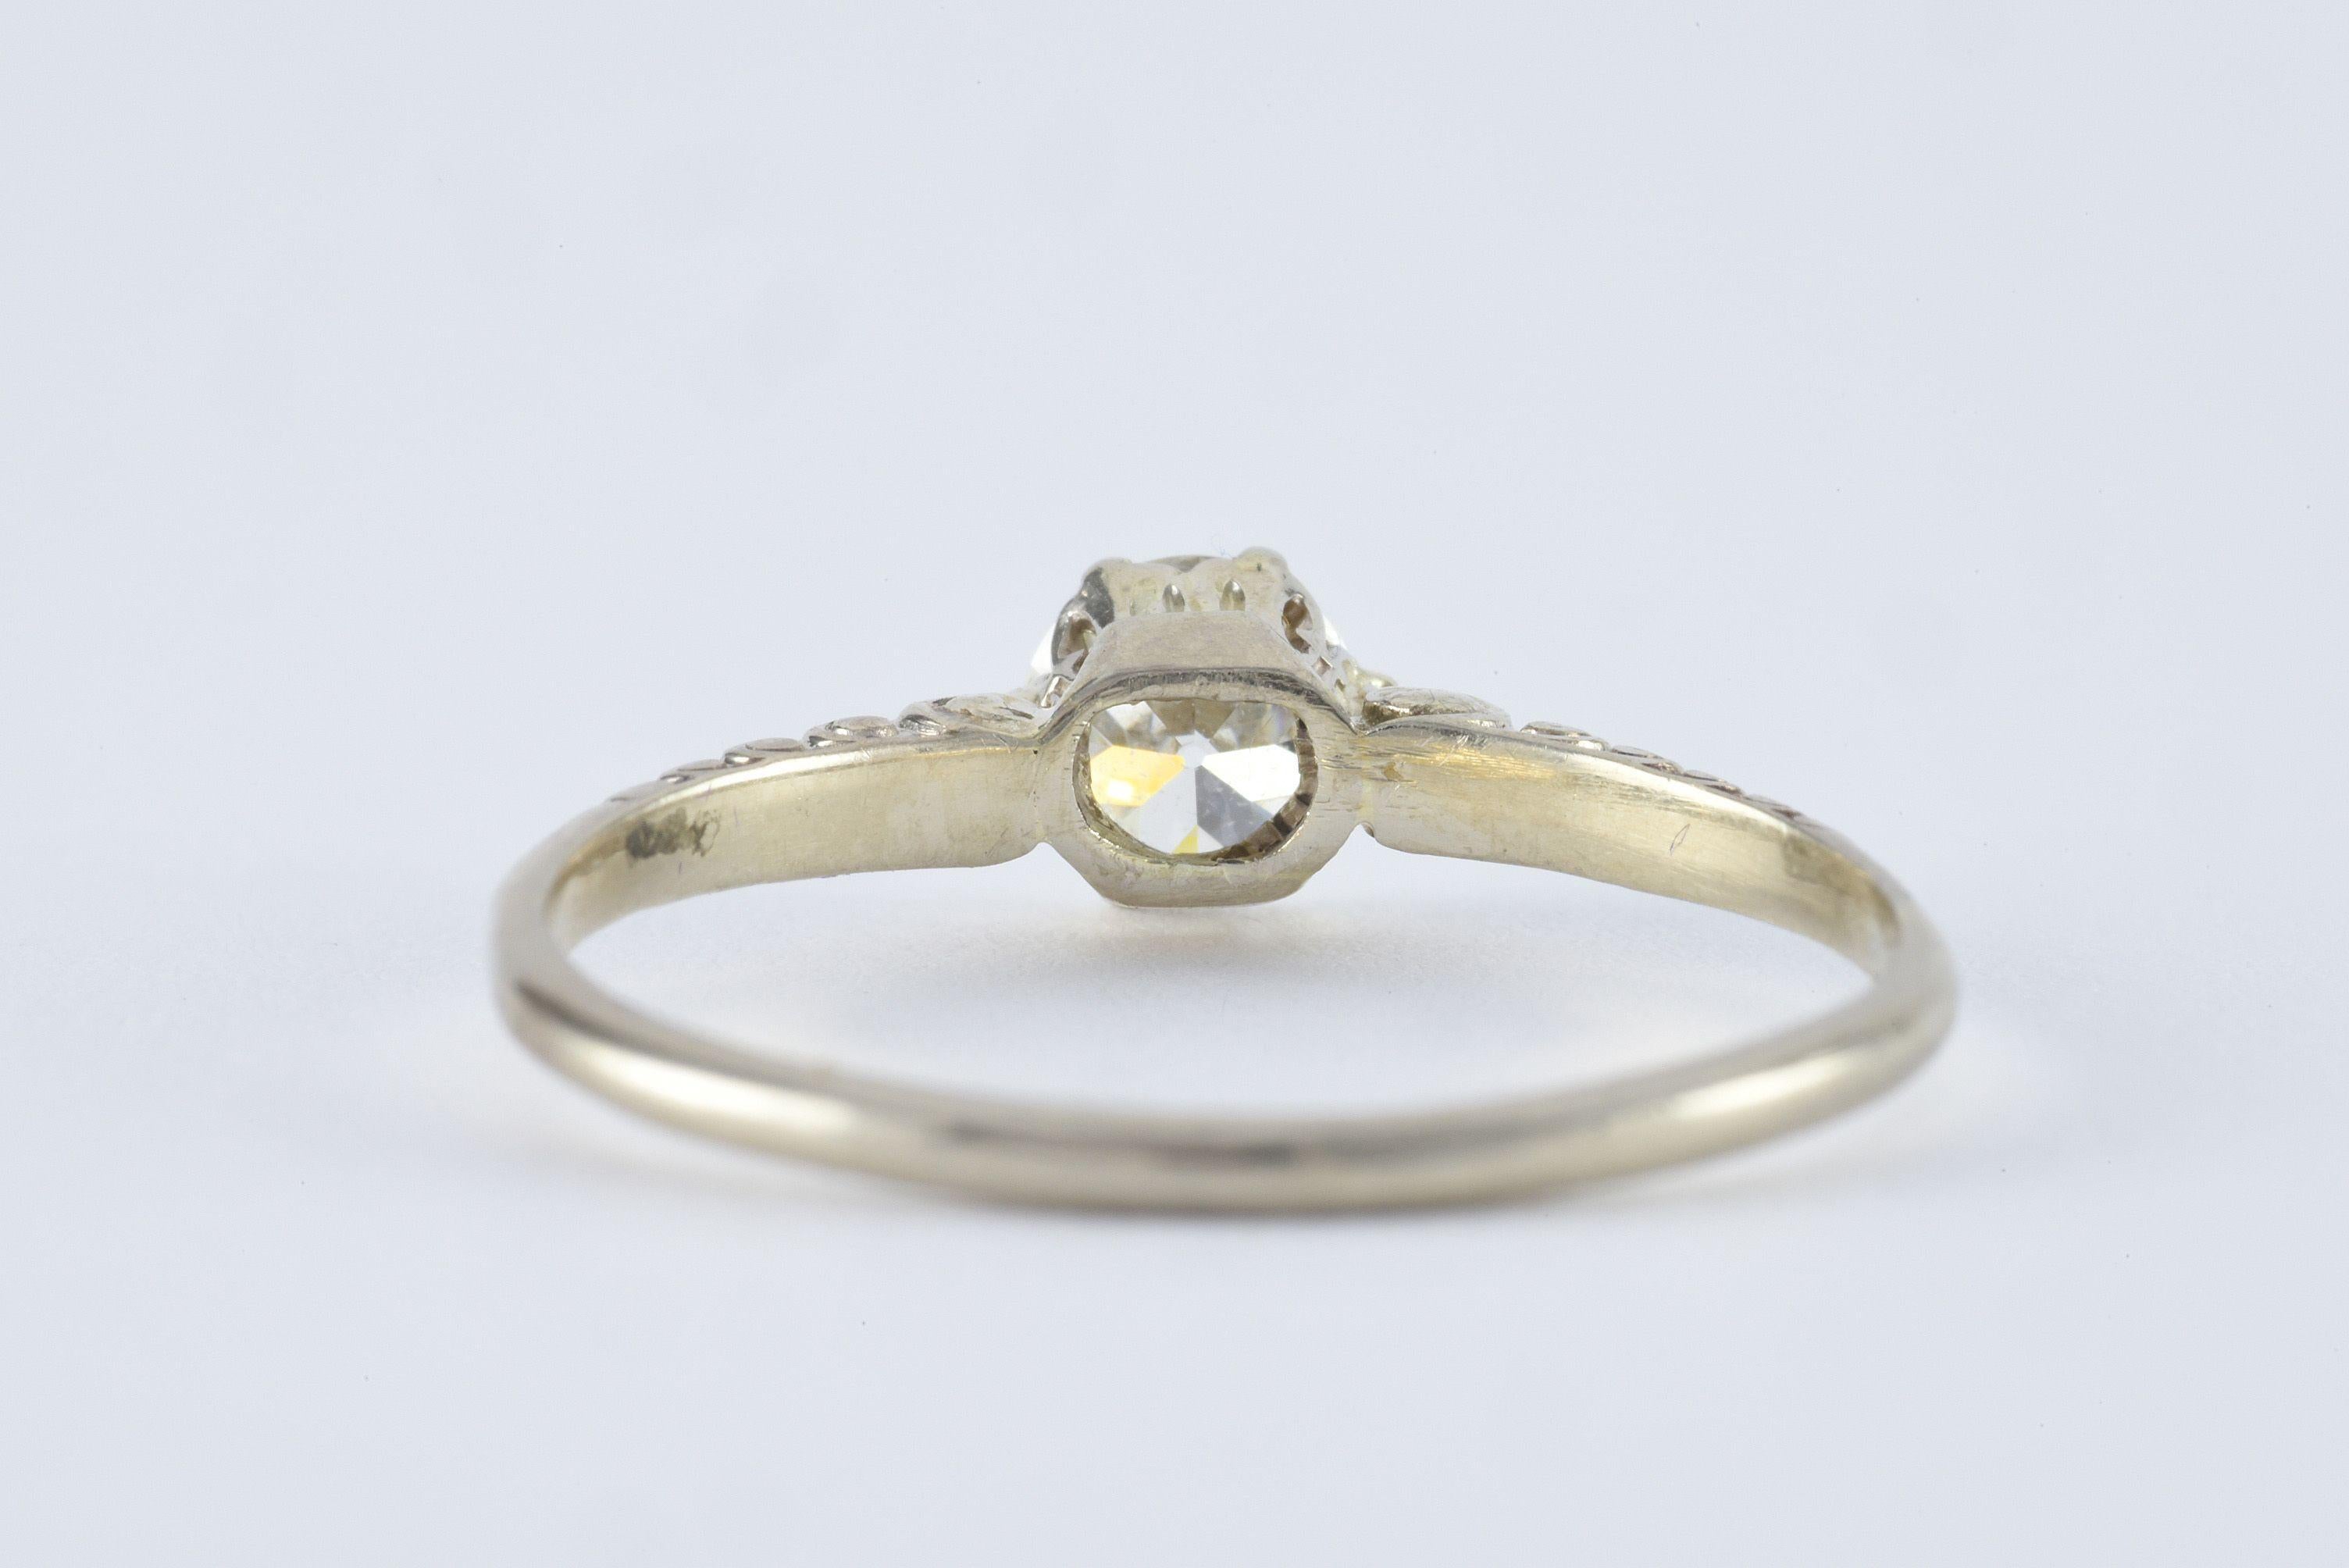 GIA Certified 0.62 Carat Old European Cut Diamond Solitaire Engagement Ring In Good Condition For Sale In Denver, CO